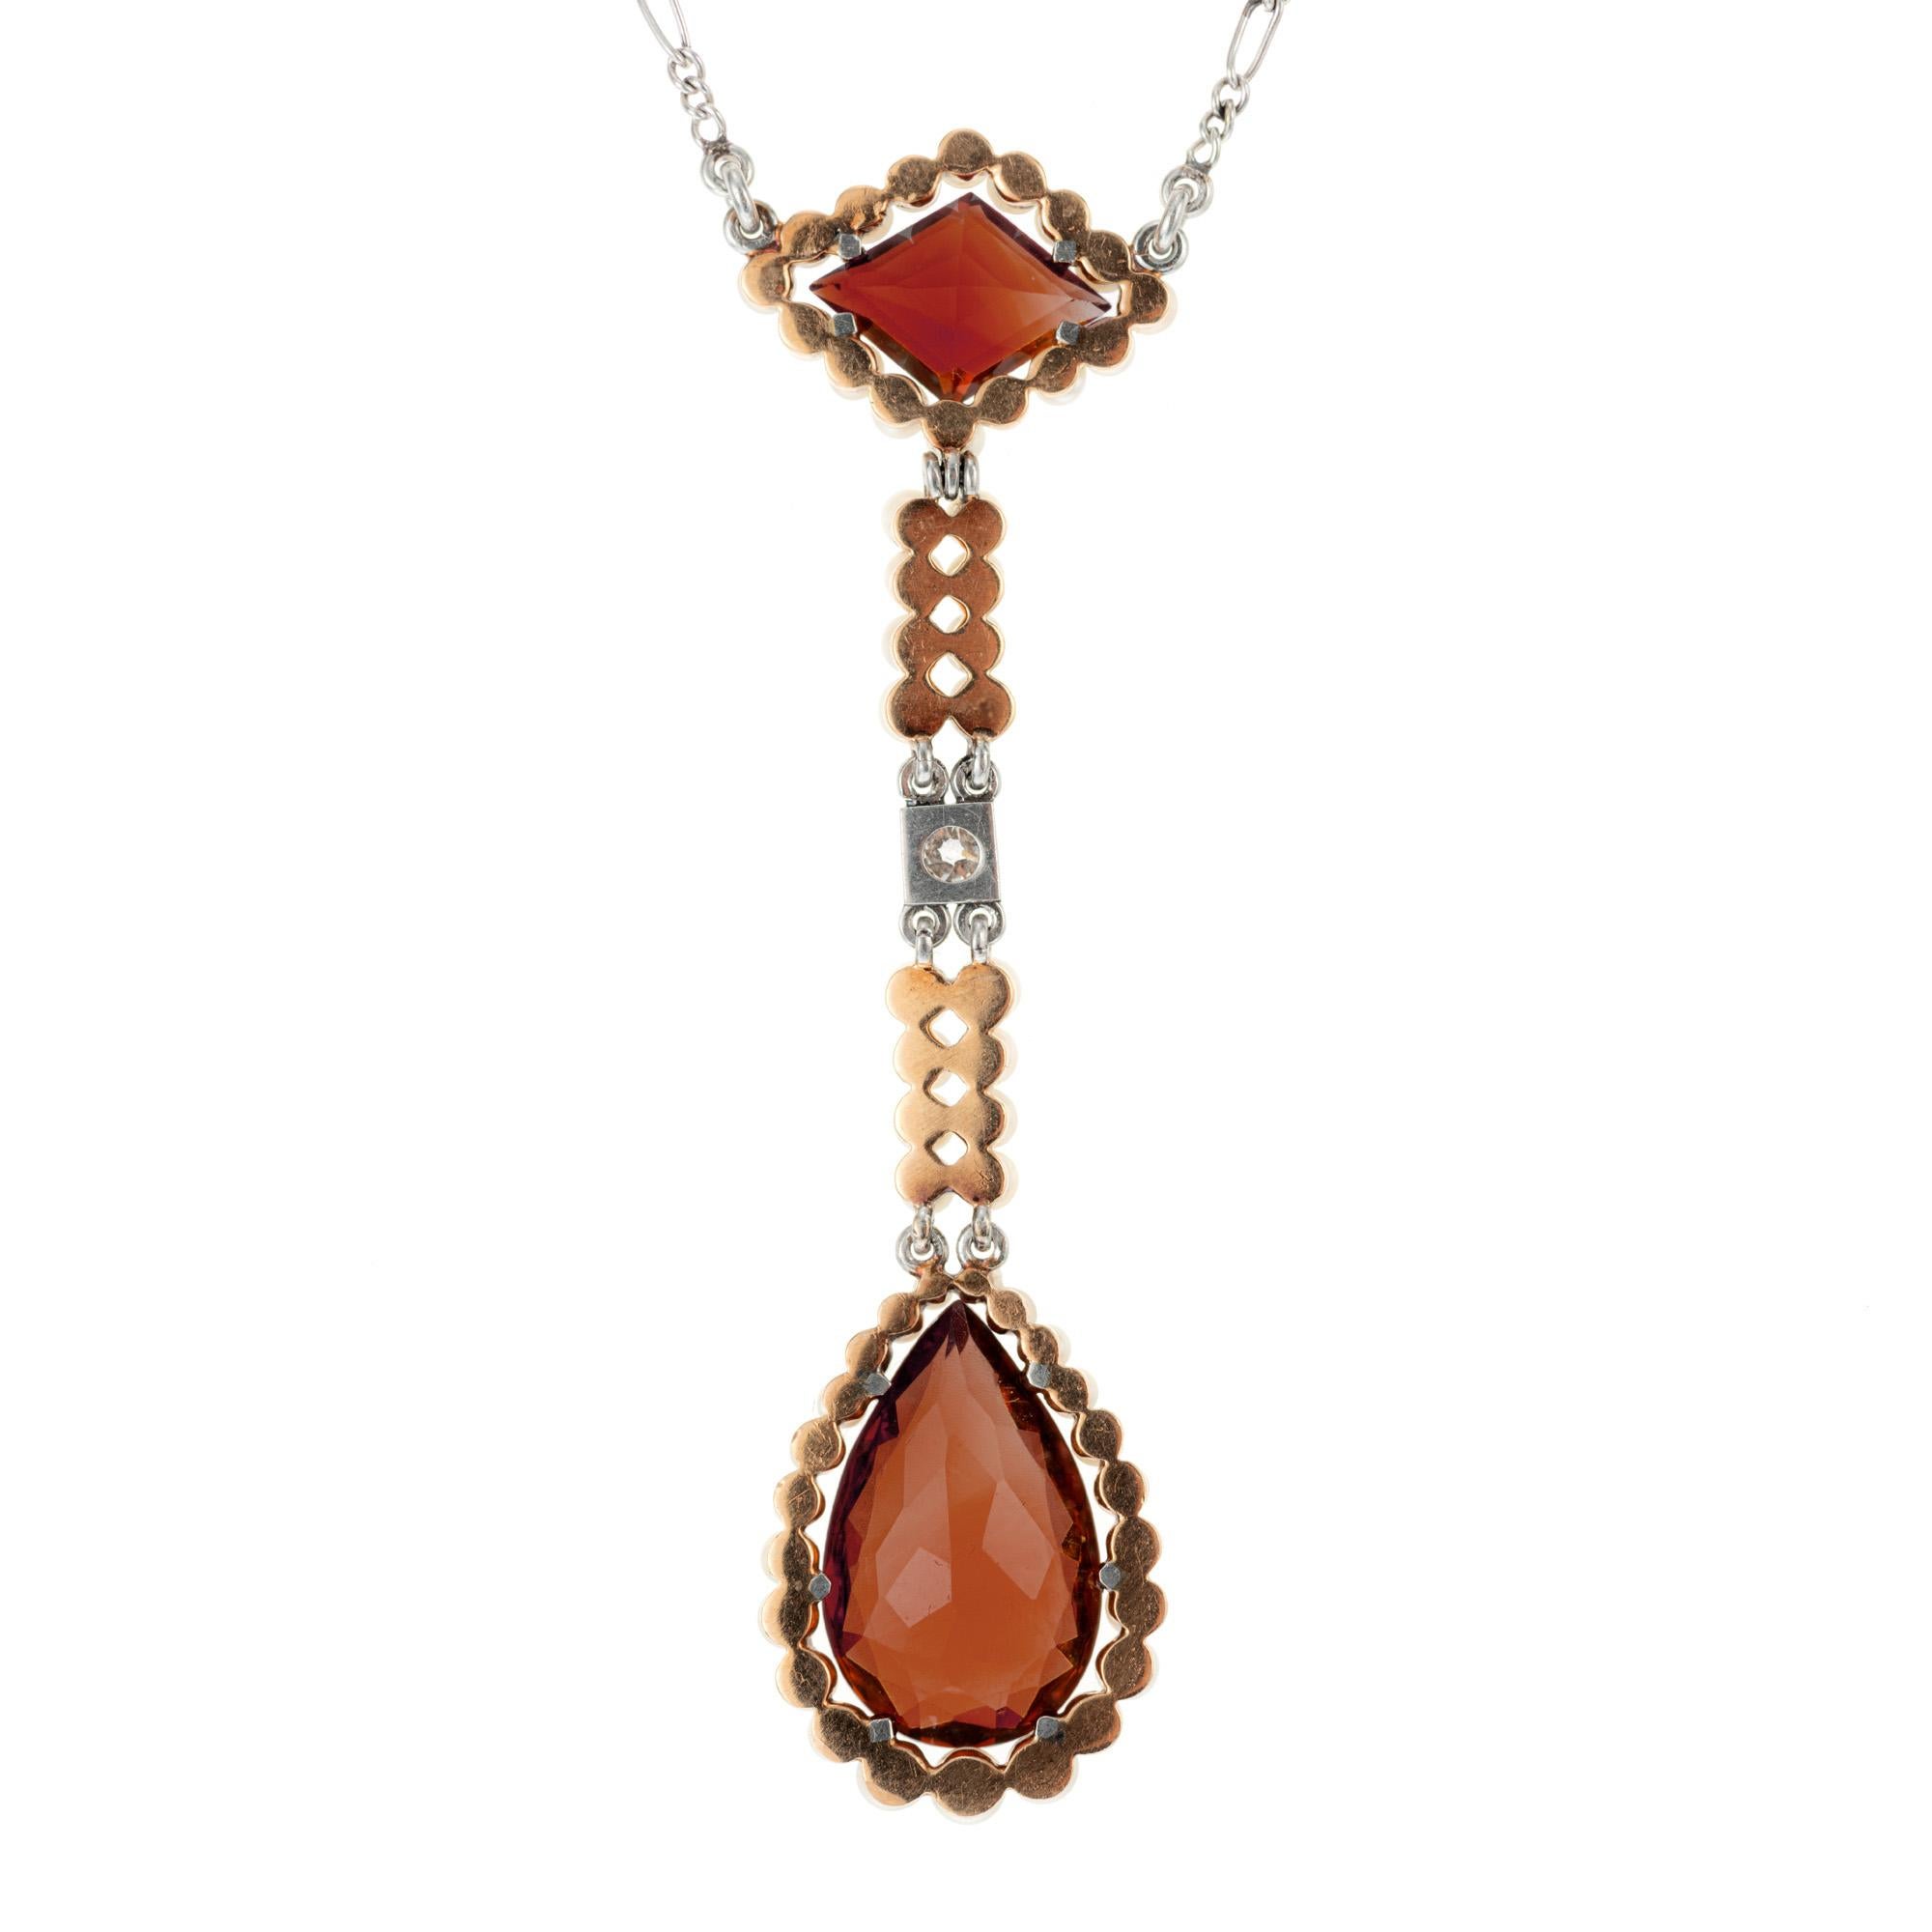 Art Deco 1920's Art Deco Lavaliere style Platinum and pink gold handmade pendant.  A diamond shaped citrine, set sideways with a halo of seed pearls connects to a pear shaped citrine, also with a halo of seed pearls. A two row seed pearl strand with